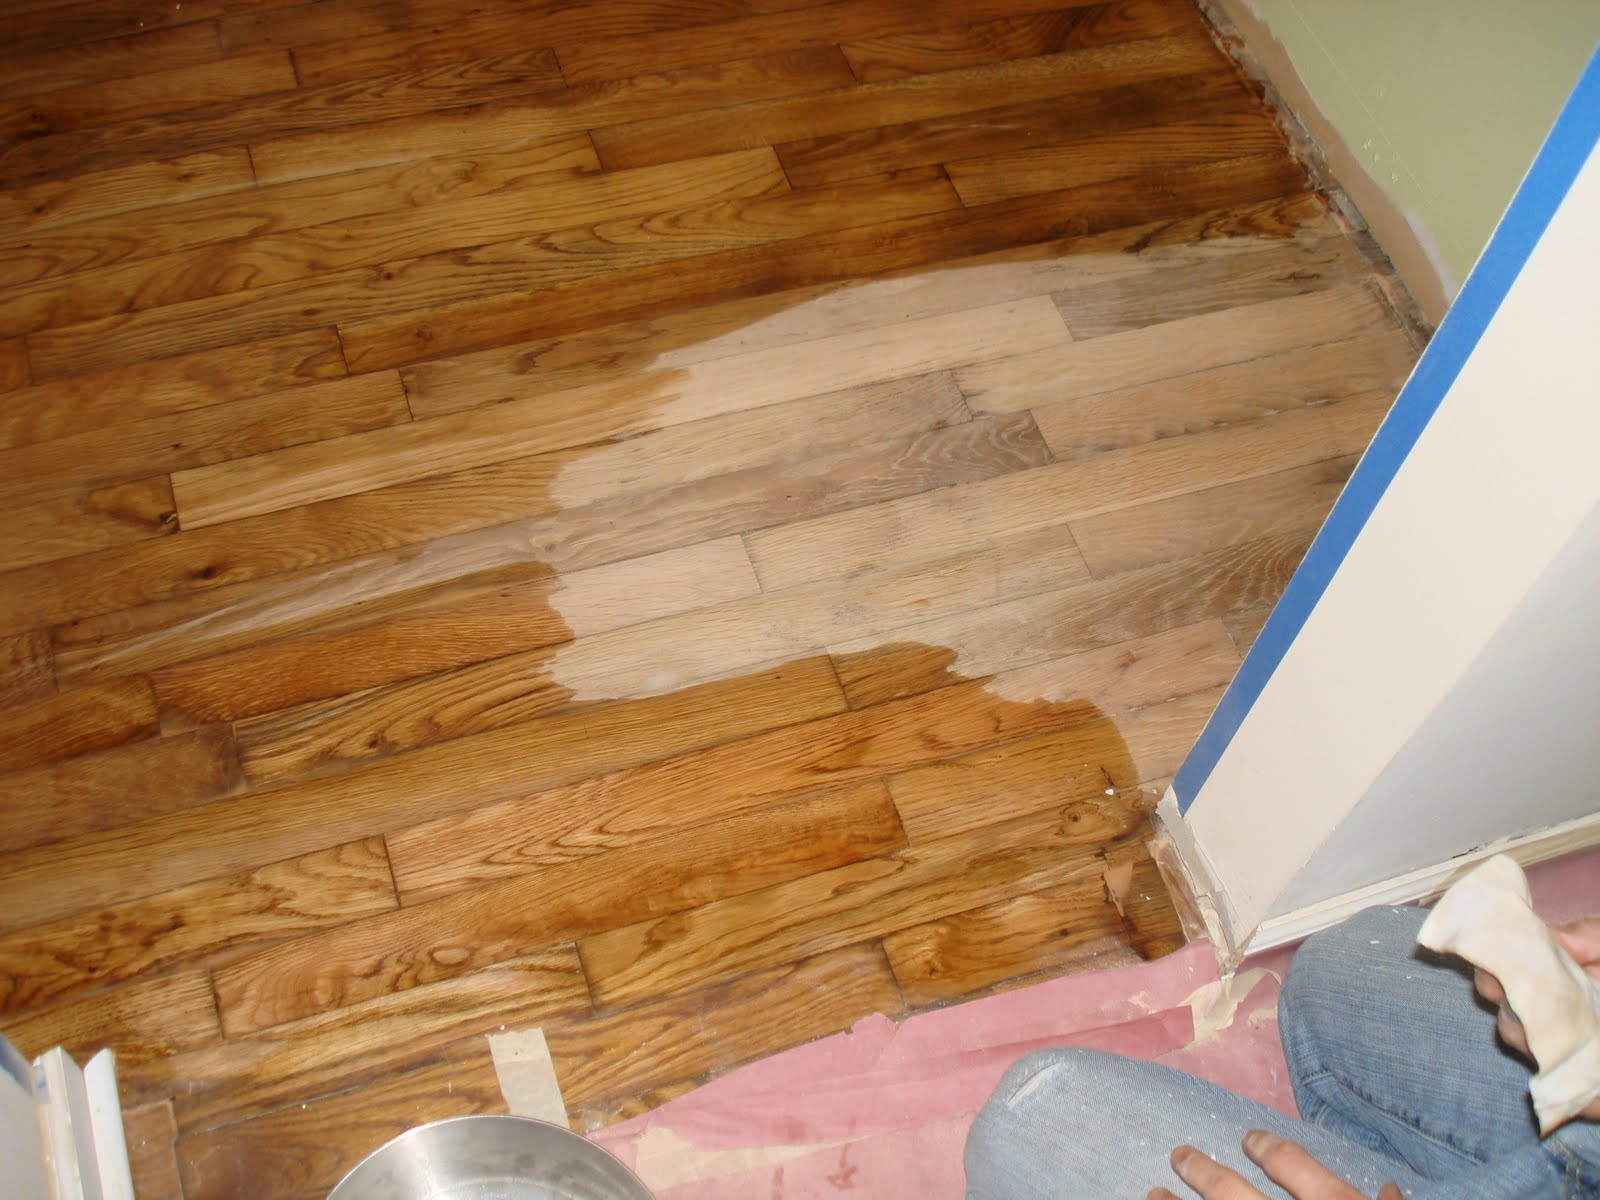 images of red oak hardwood floors of minwax stains on red oak floors houses flooring picture ideas in minwax stains on red oak floors houses flooring picture ideas